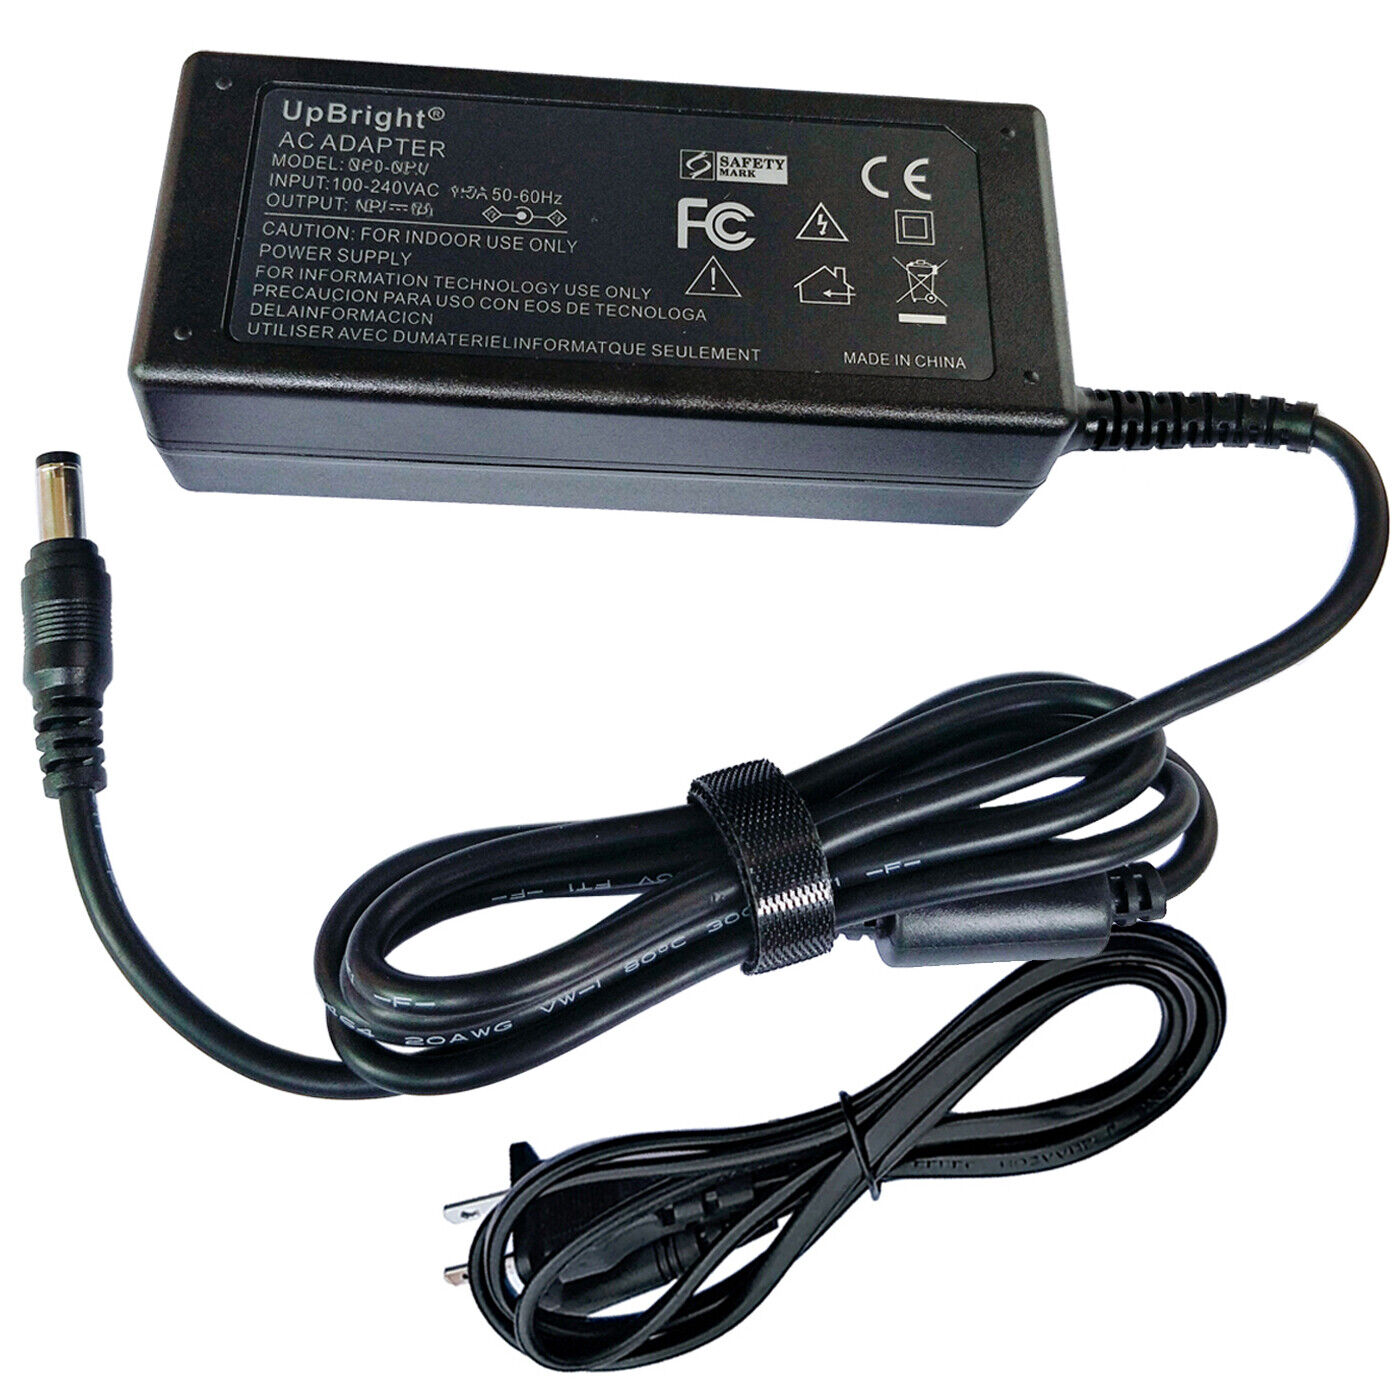 Laptop AC Power Adapter Charger For Acer Extensa/Aspire One/TimelineX Notebook